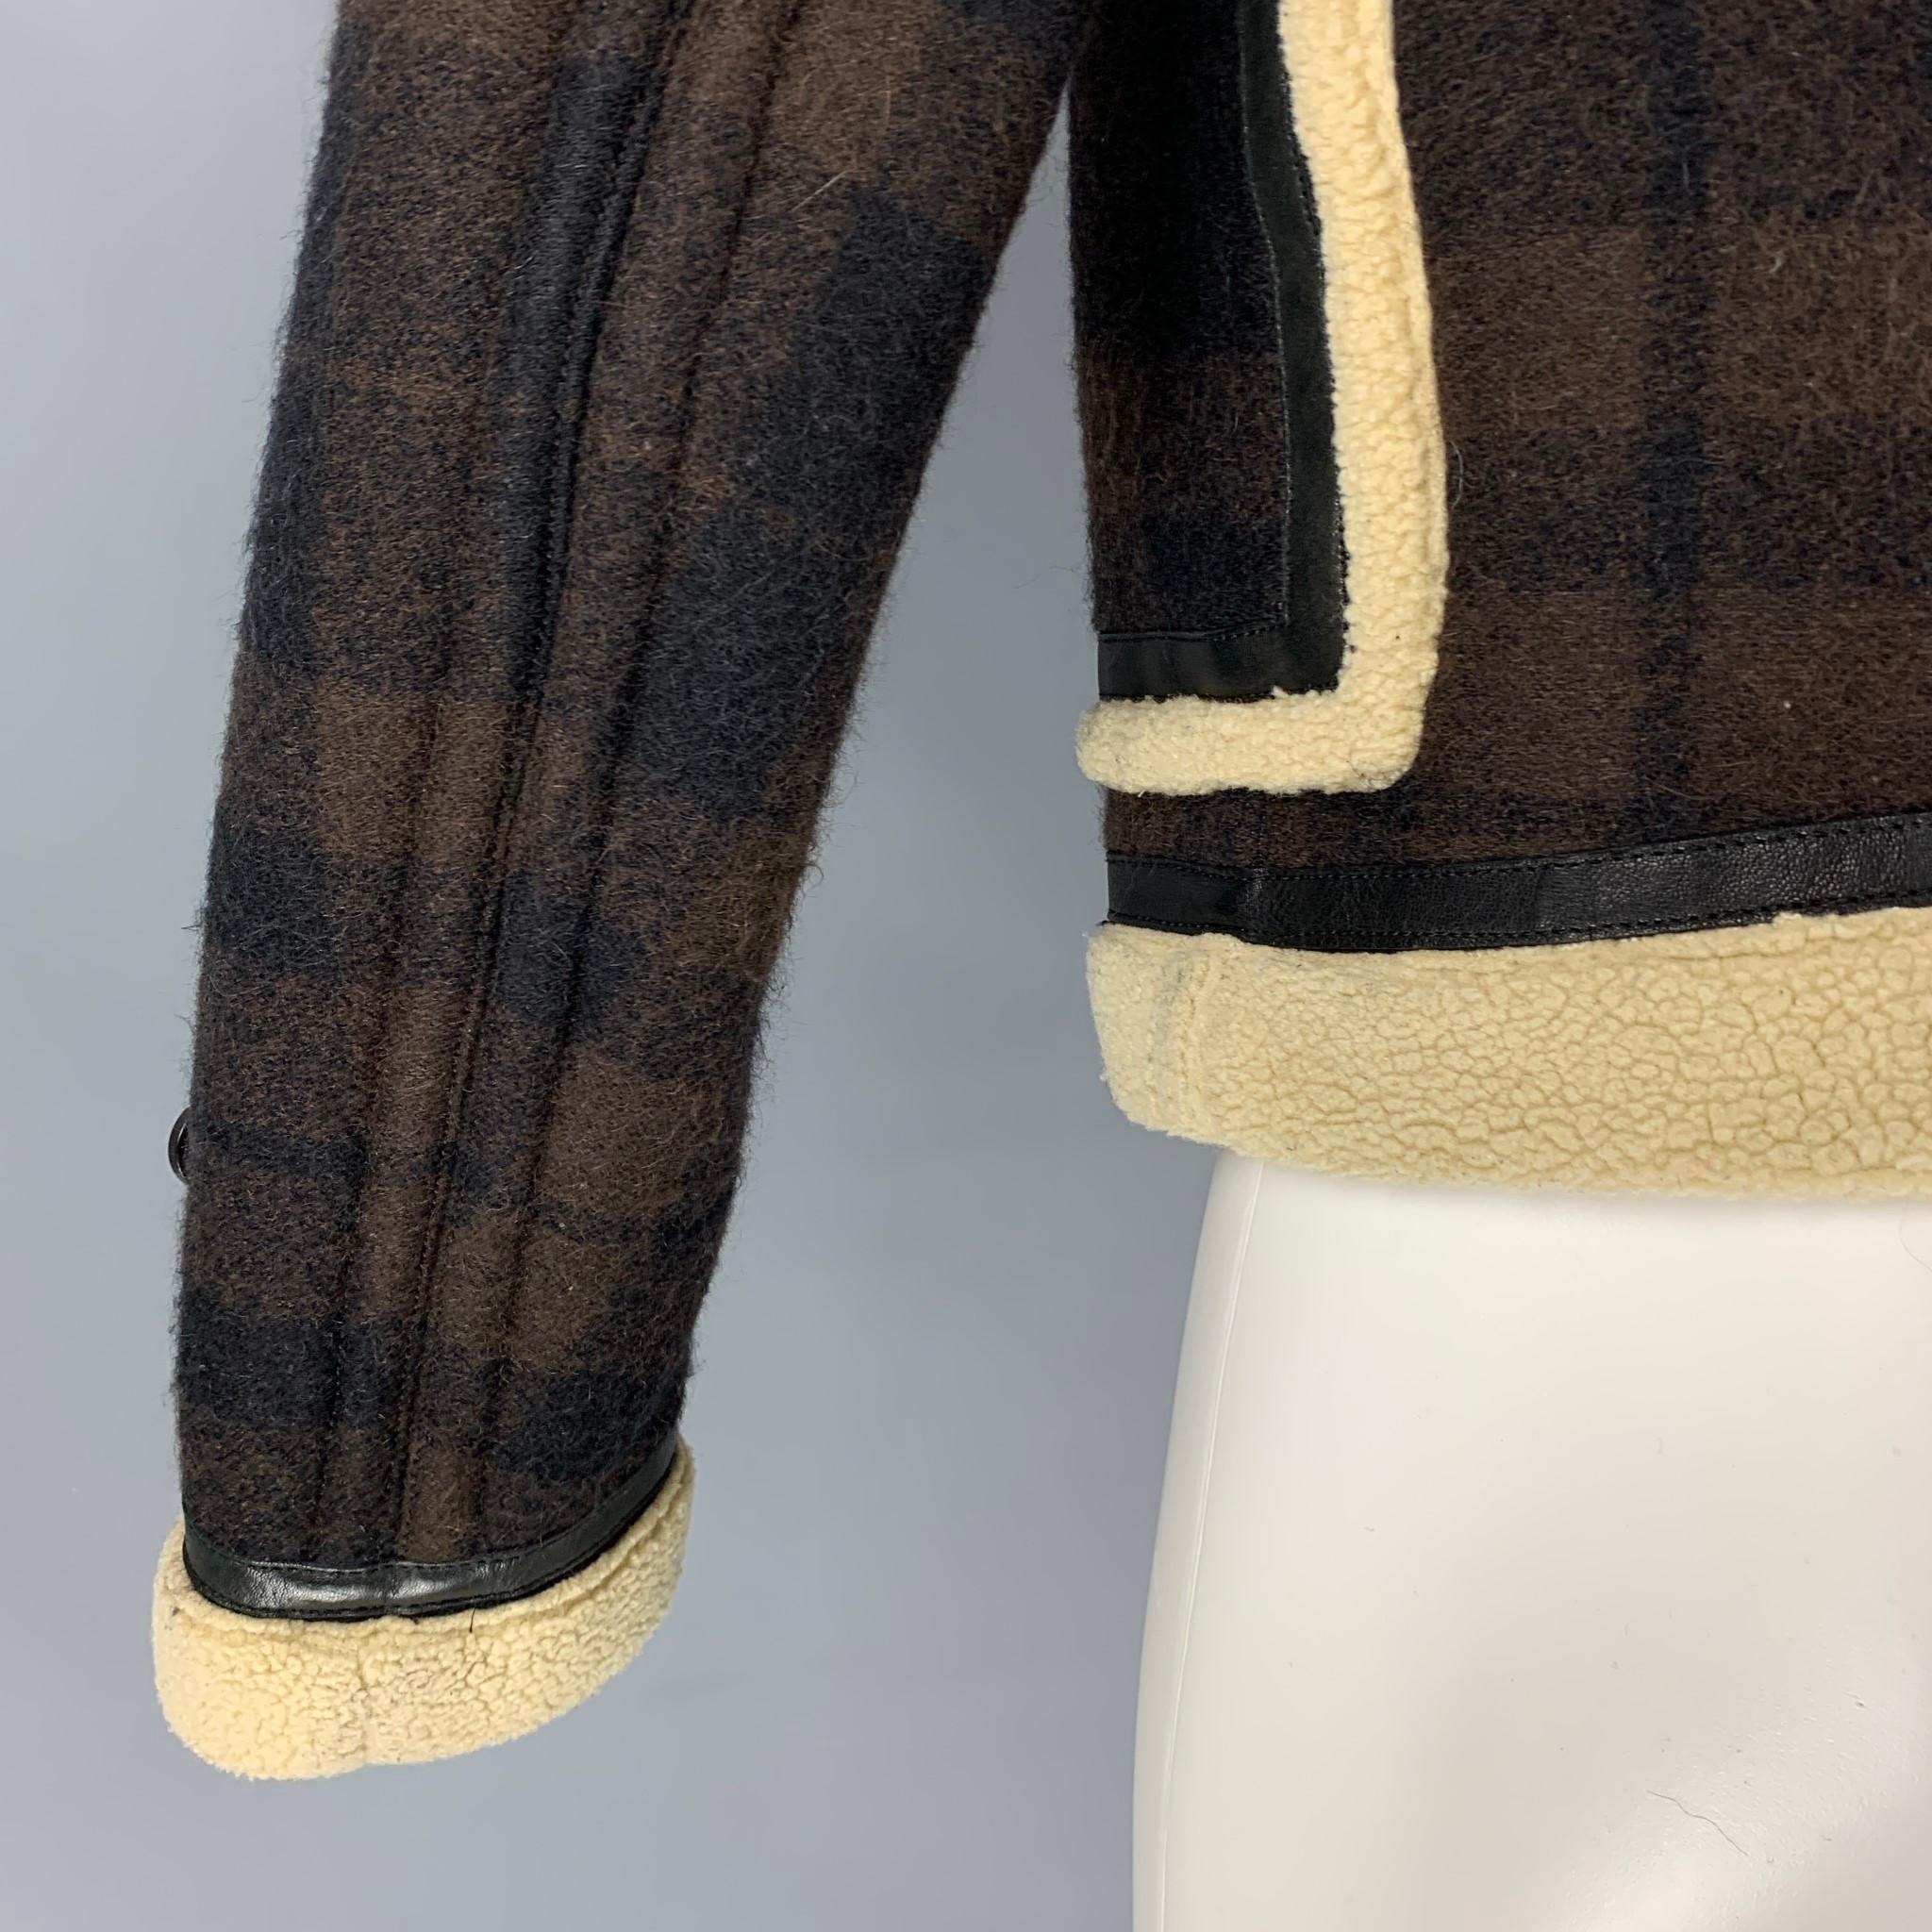 BURBERRY PRORSUM Fall 2011 Size 34 Brown & Cream Plaid Leather Shearling Jacket 1